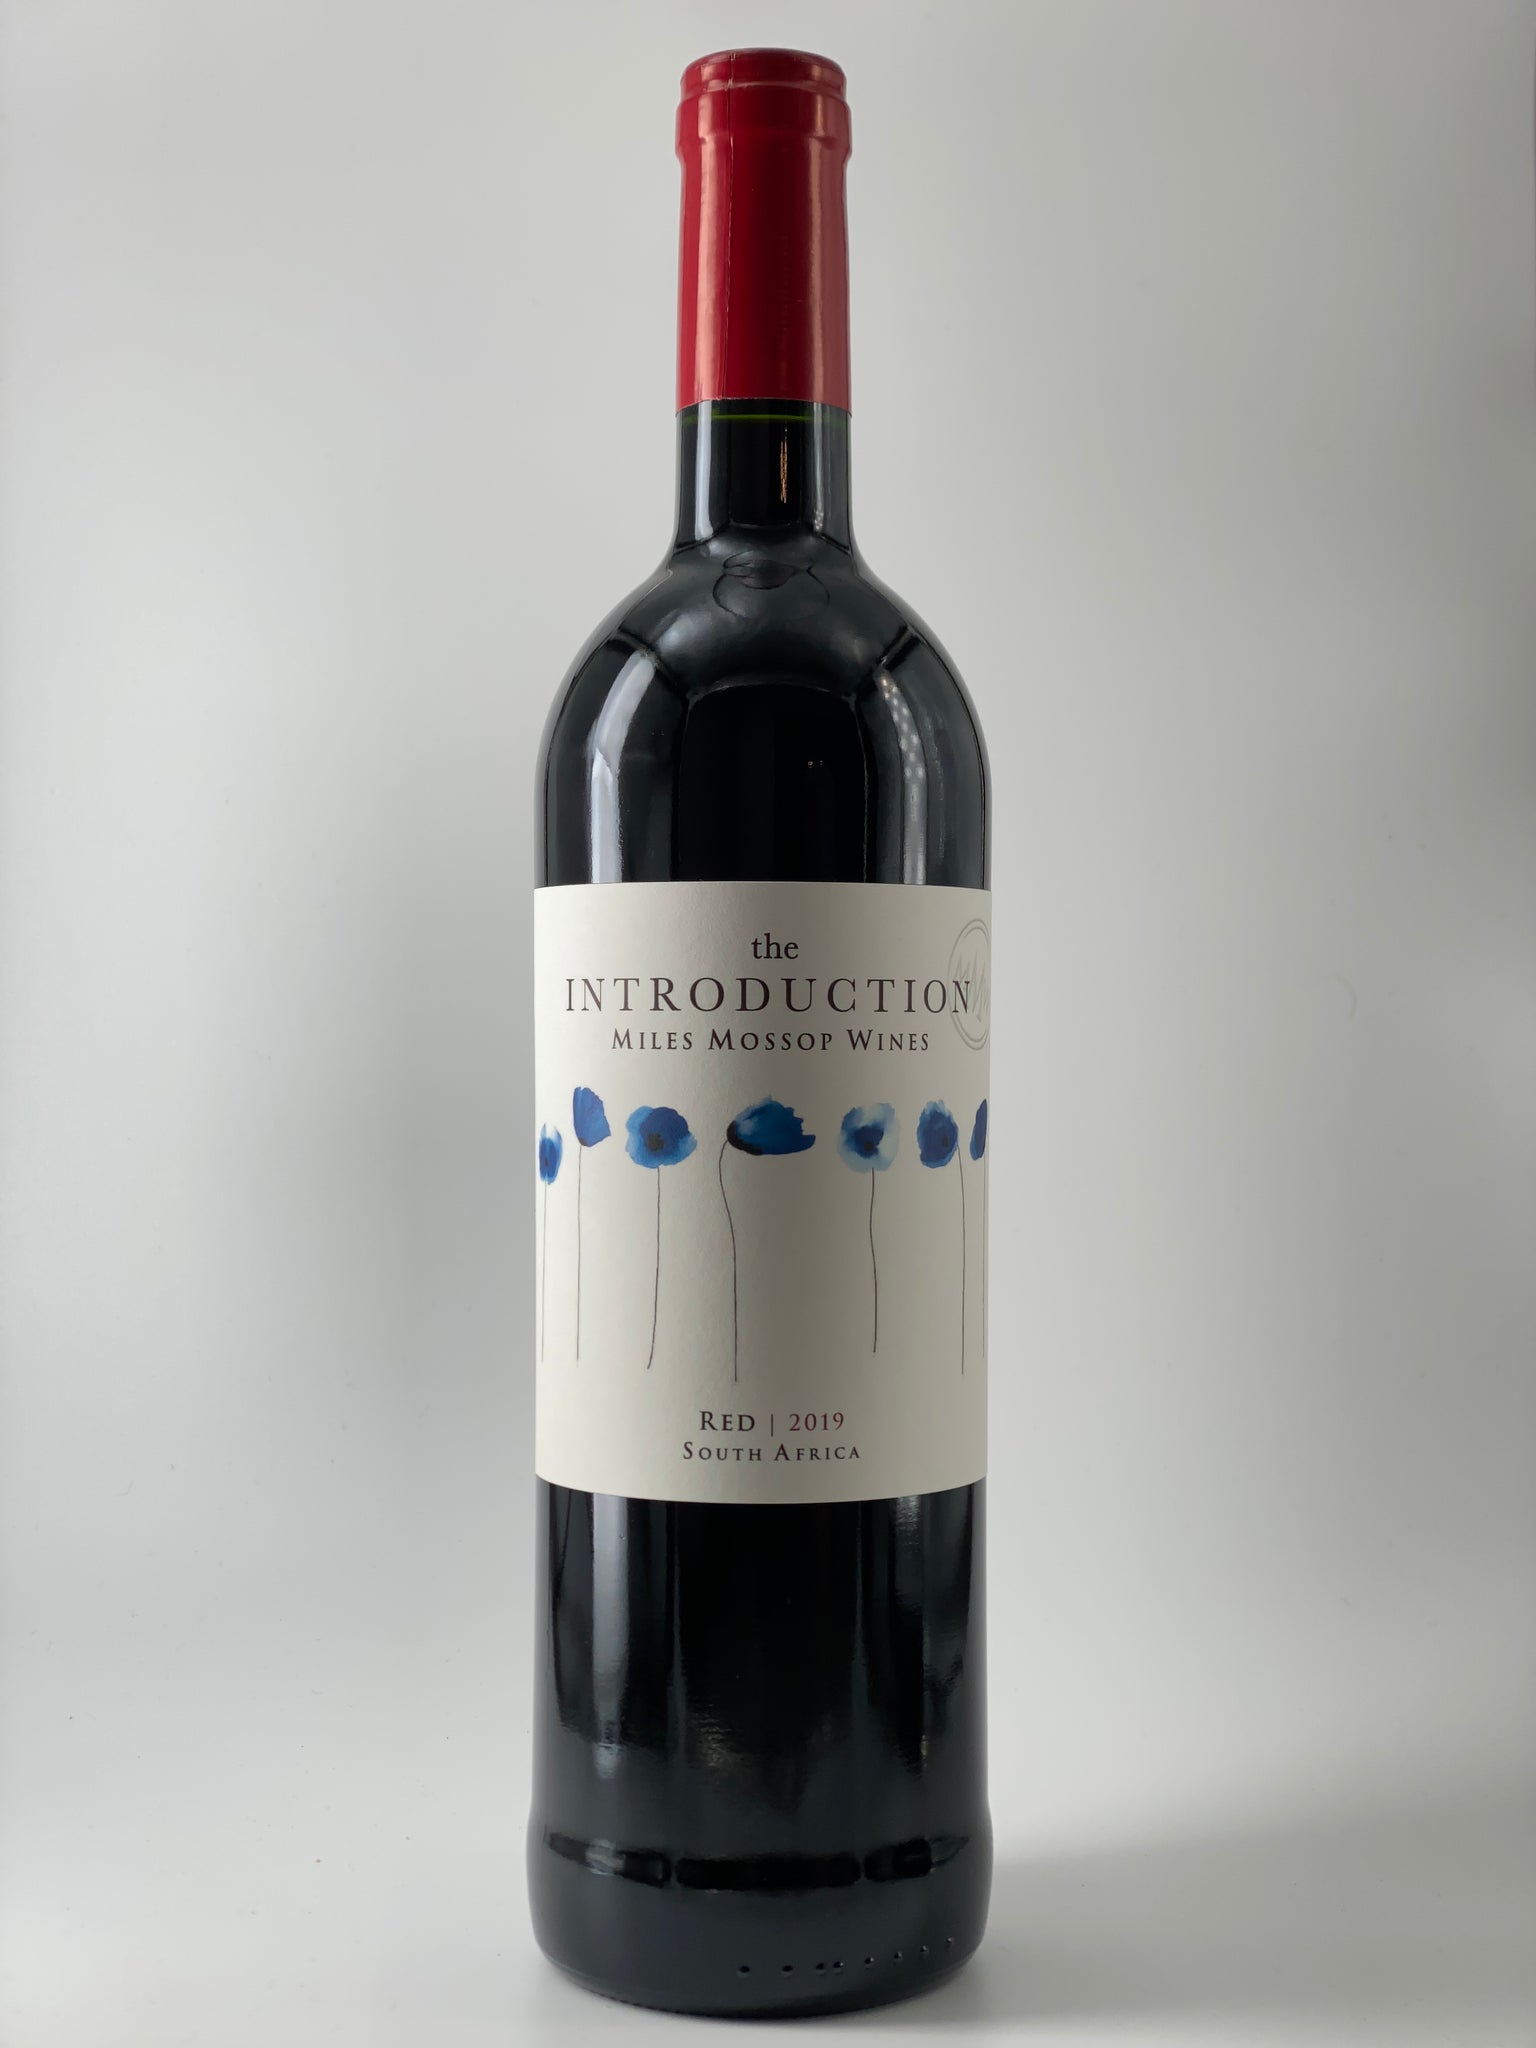 Red Blend, Miles Mossop The Introduction